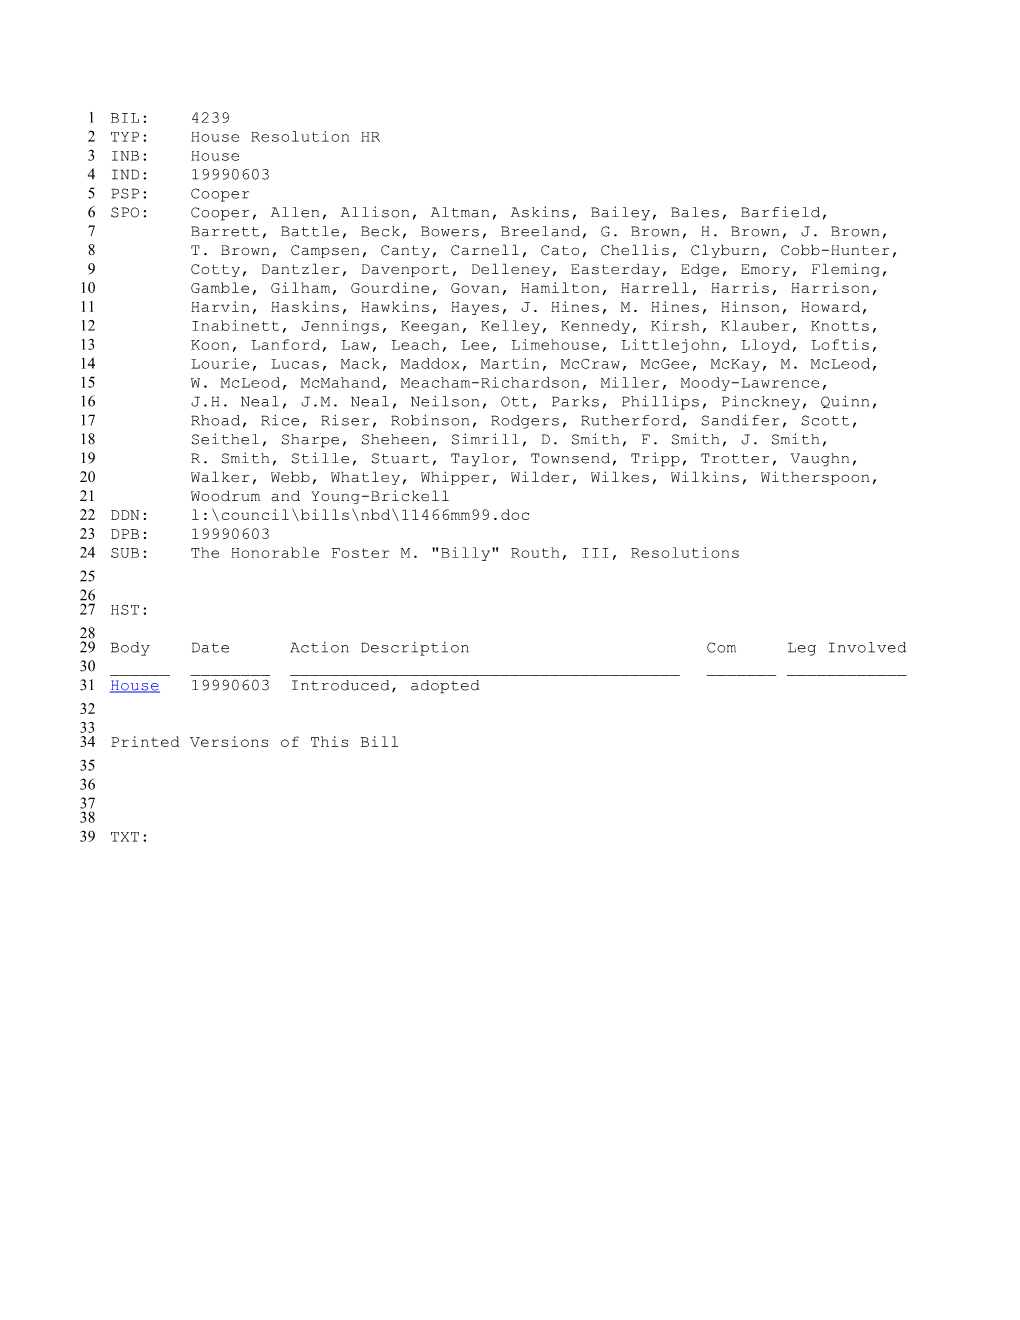 1999-2000 Bill 4239: the Honorable Foster M. Billy Routh, III, Resolutions - South Carolina